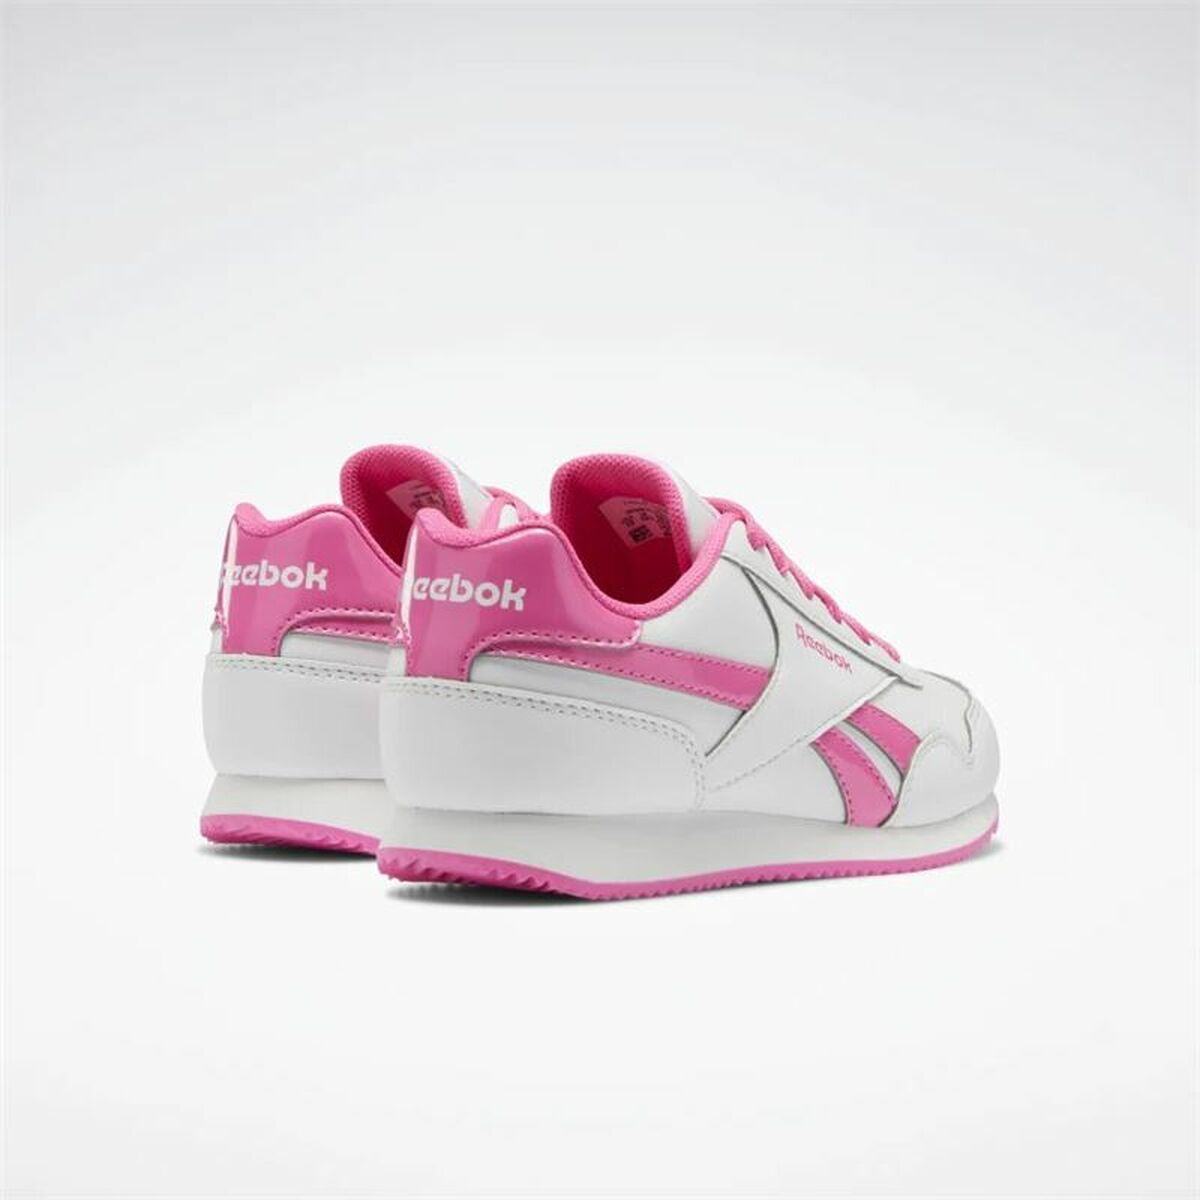 Sports Shoes for Kids Reebok Royal Classic Jogger 3.0 Pink